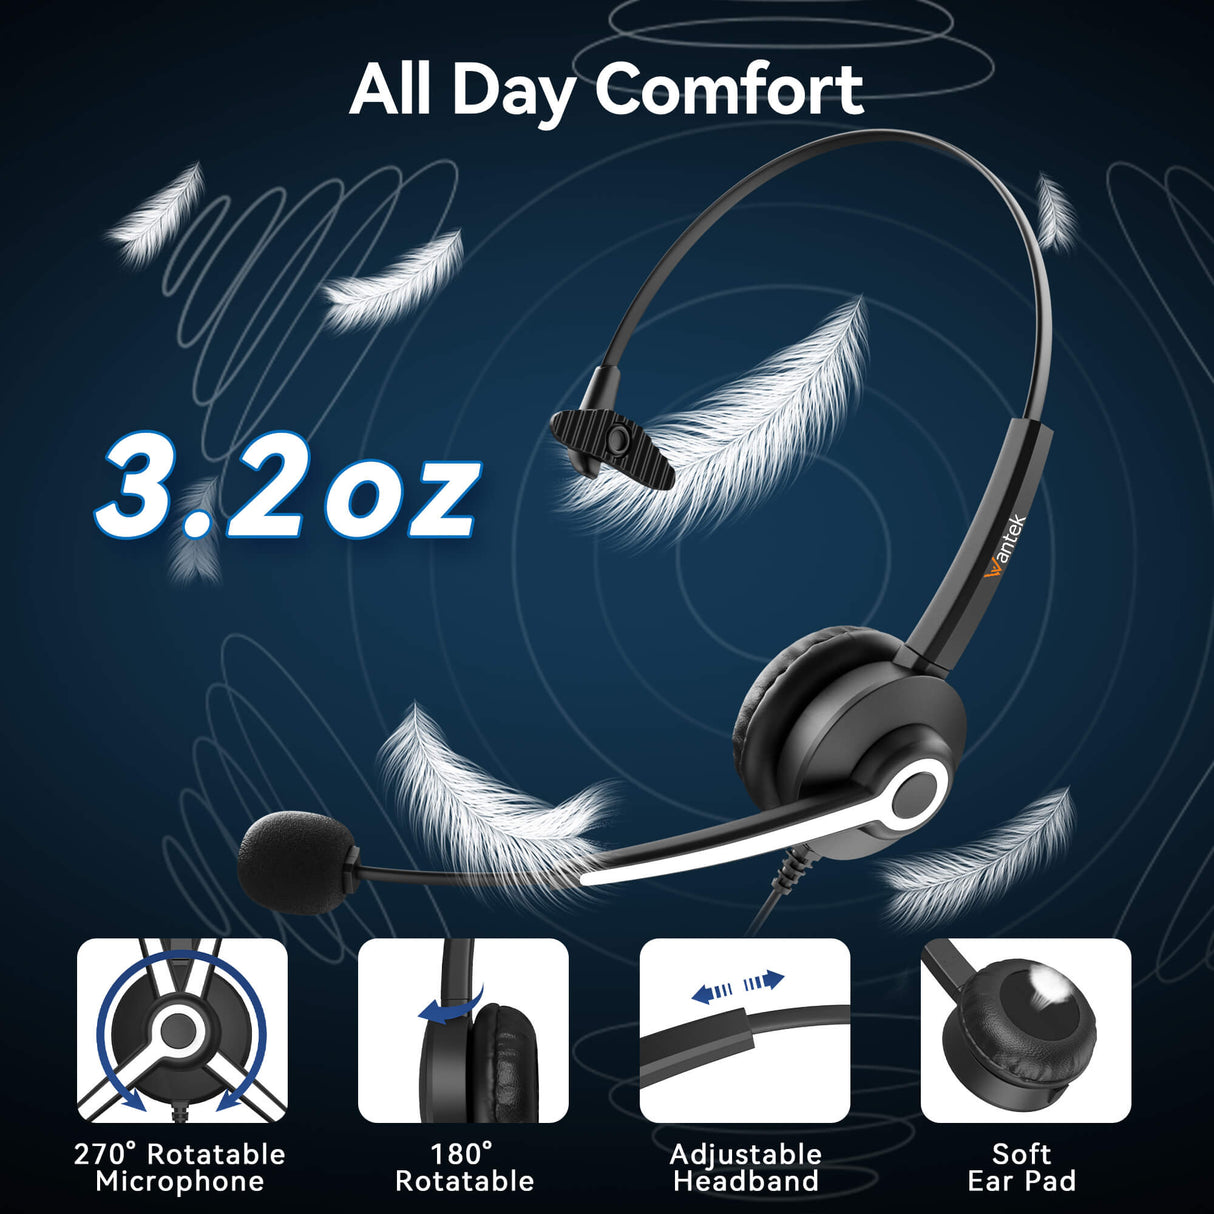 Wantek® h681 mono 3-in-1 USB headset for phones